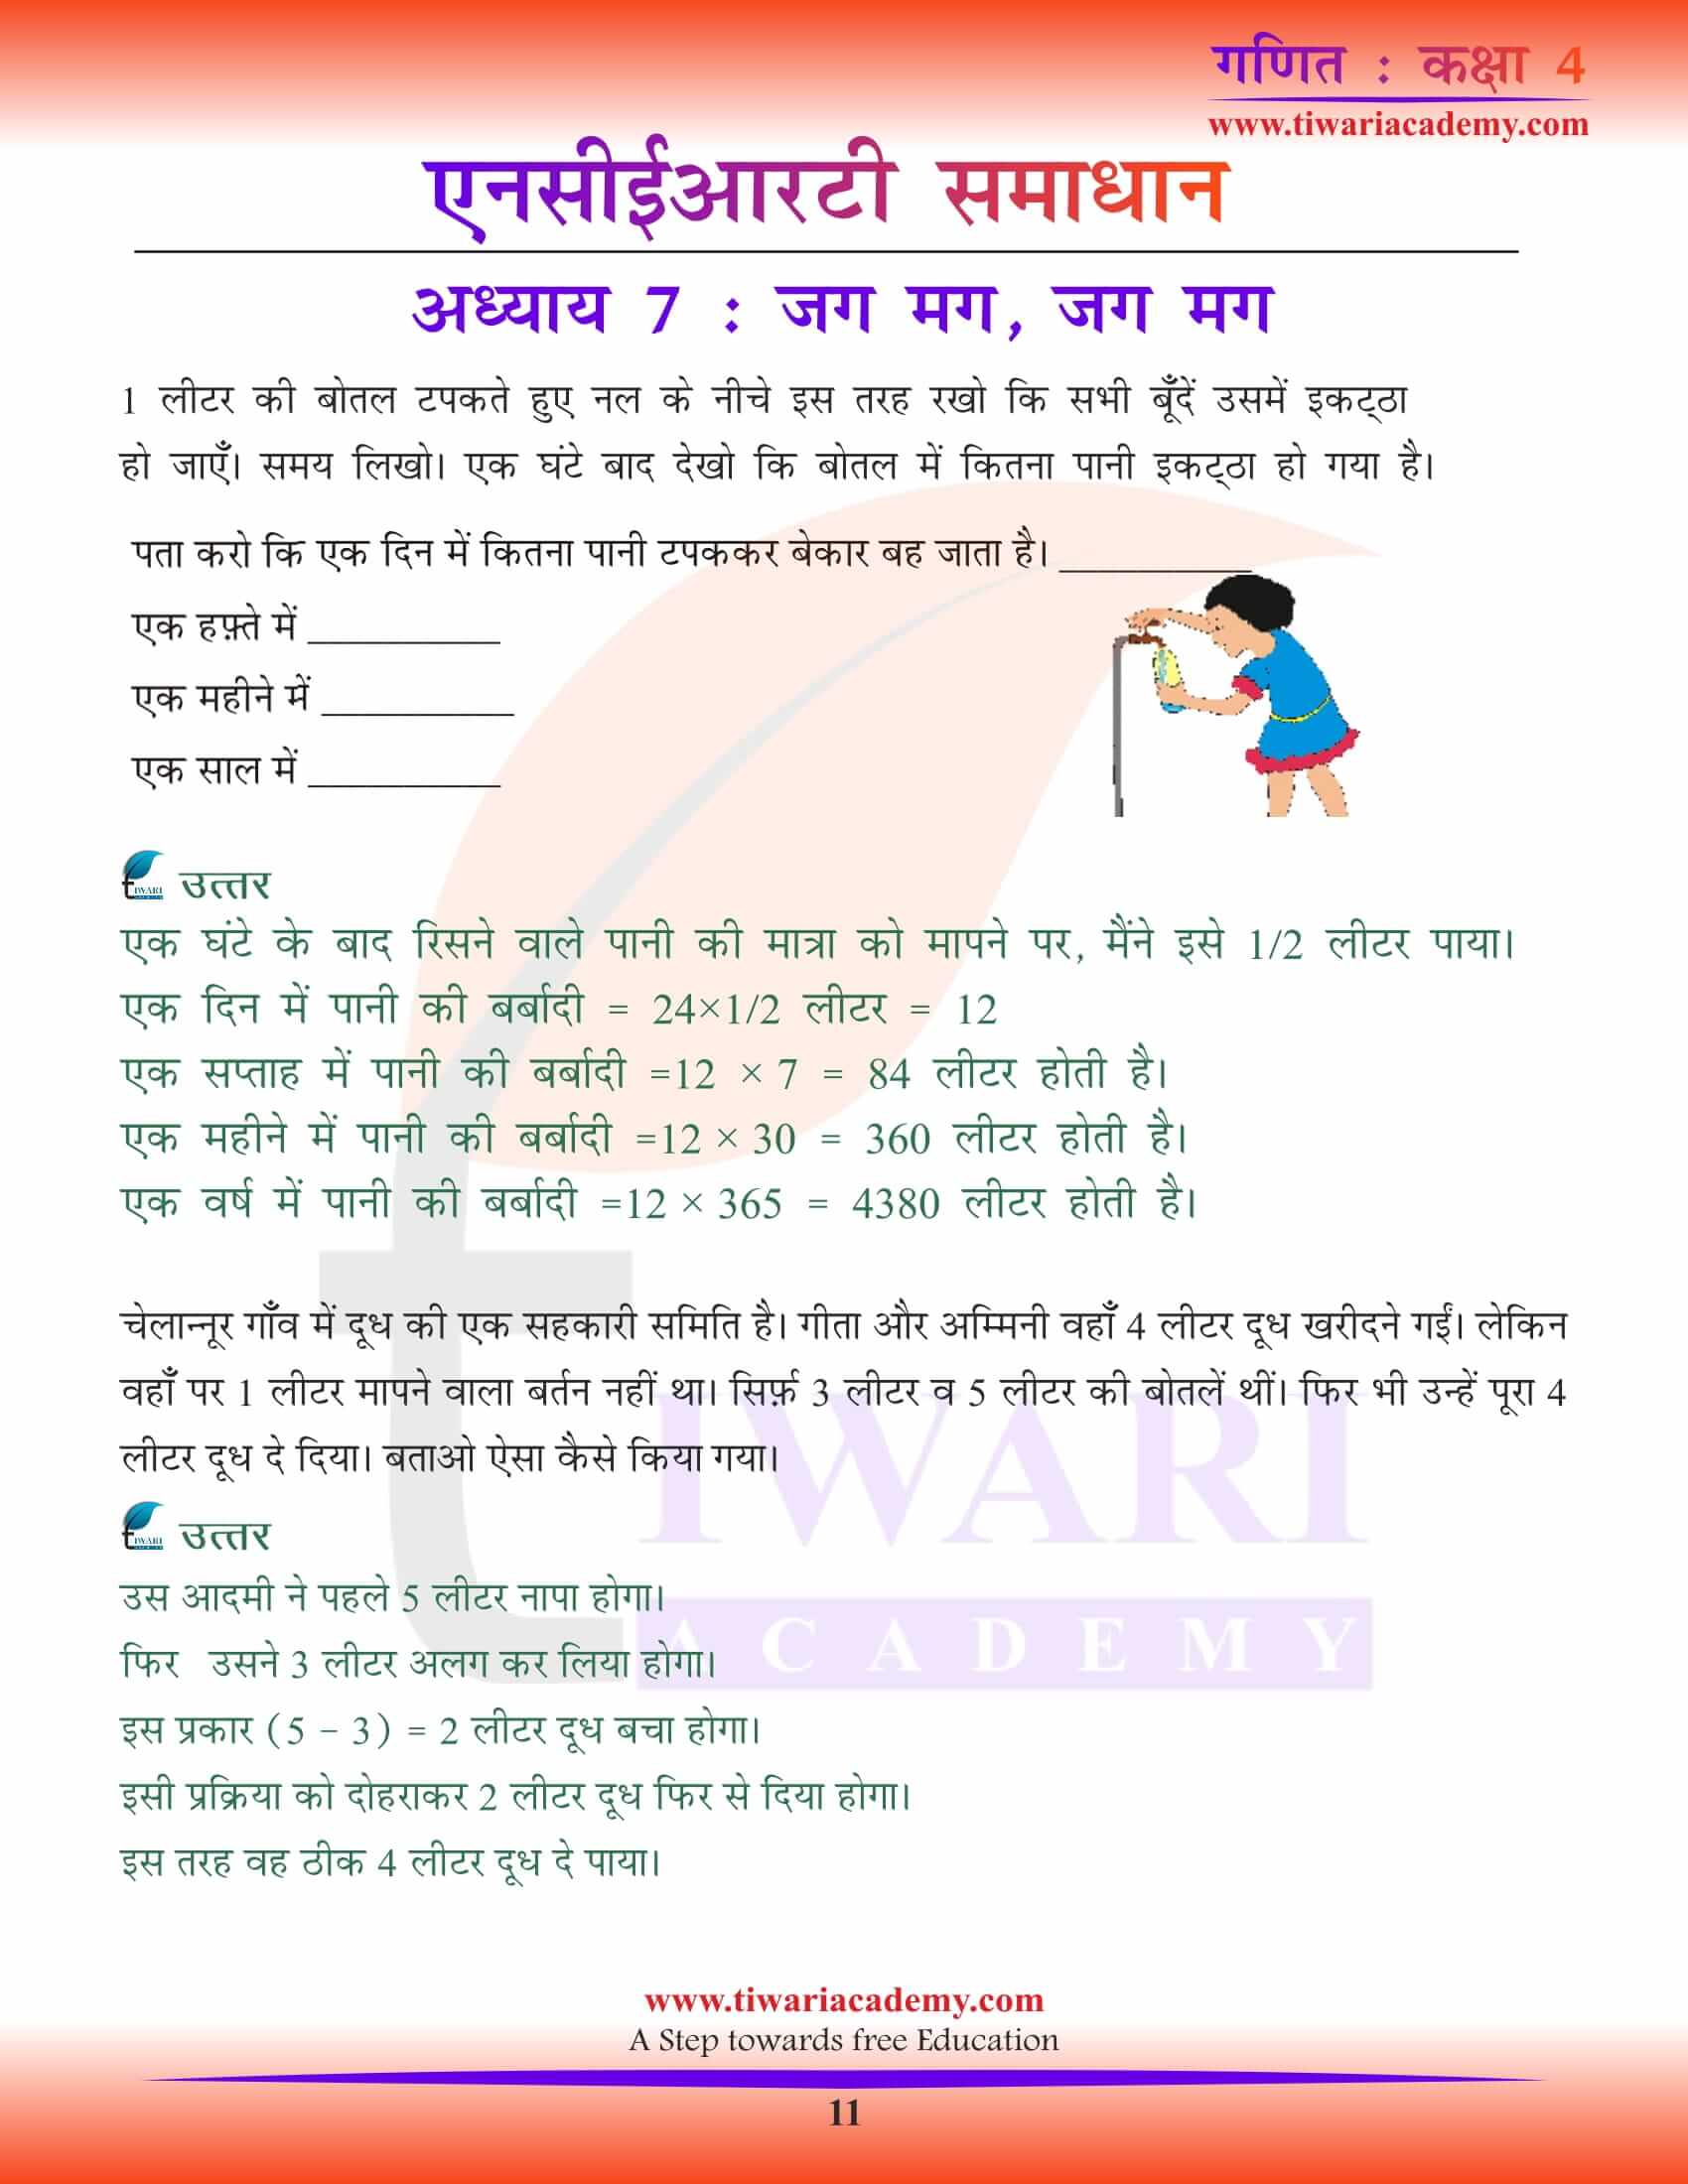 Class 4 Maths Chapter 7 free in Hindi